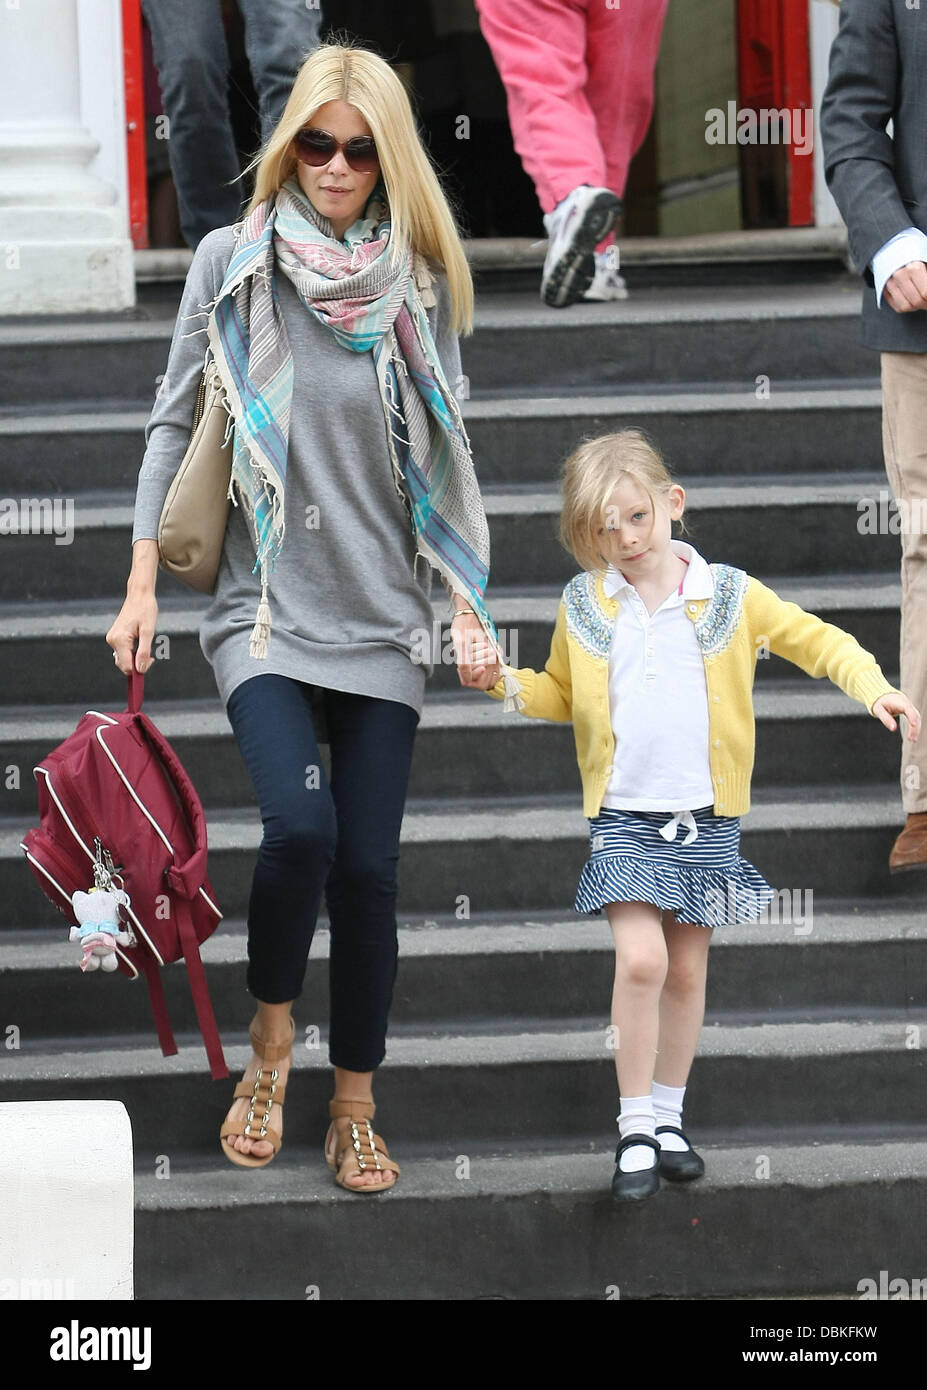 Claudia Schiffer on the school run with her daughter Clementine London, England - 06.07.11 Stock Photo